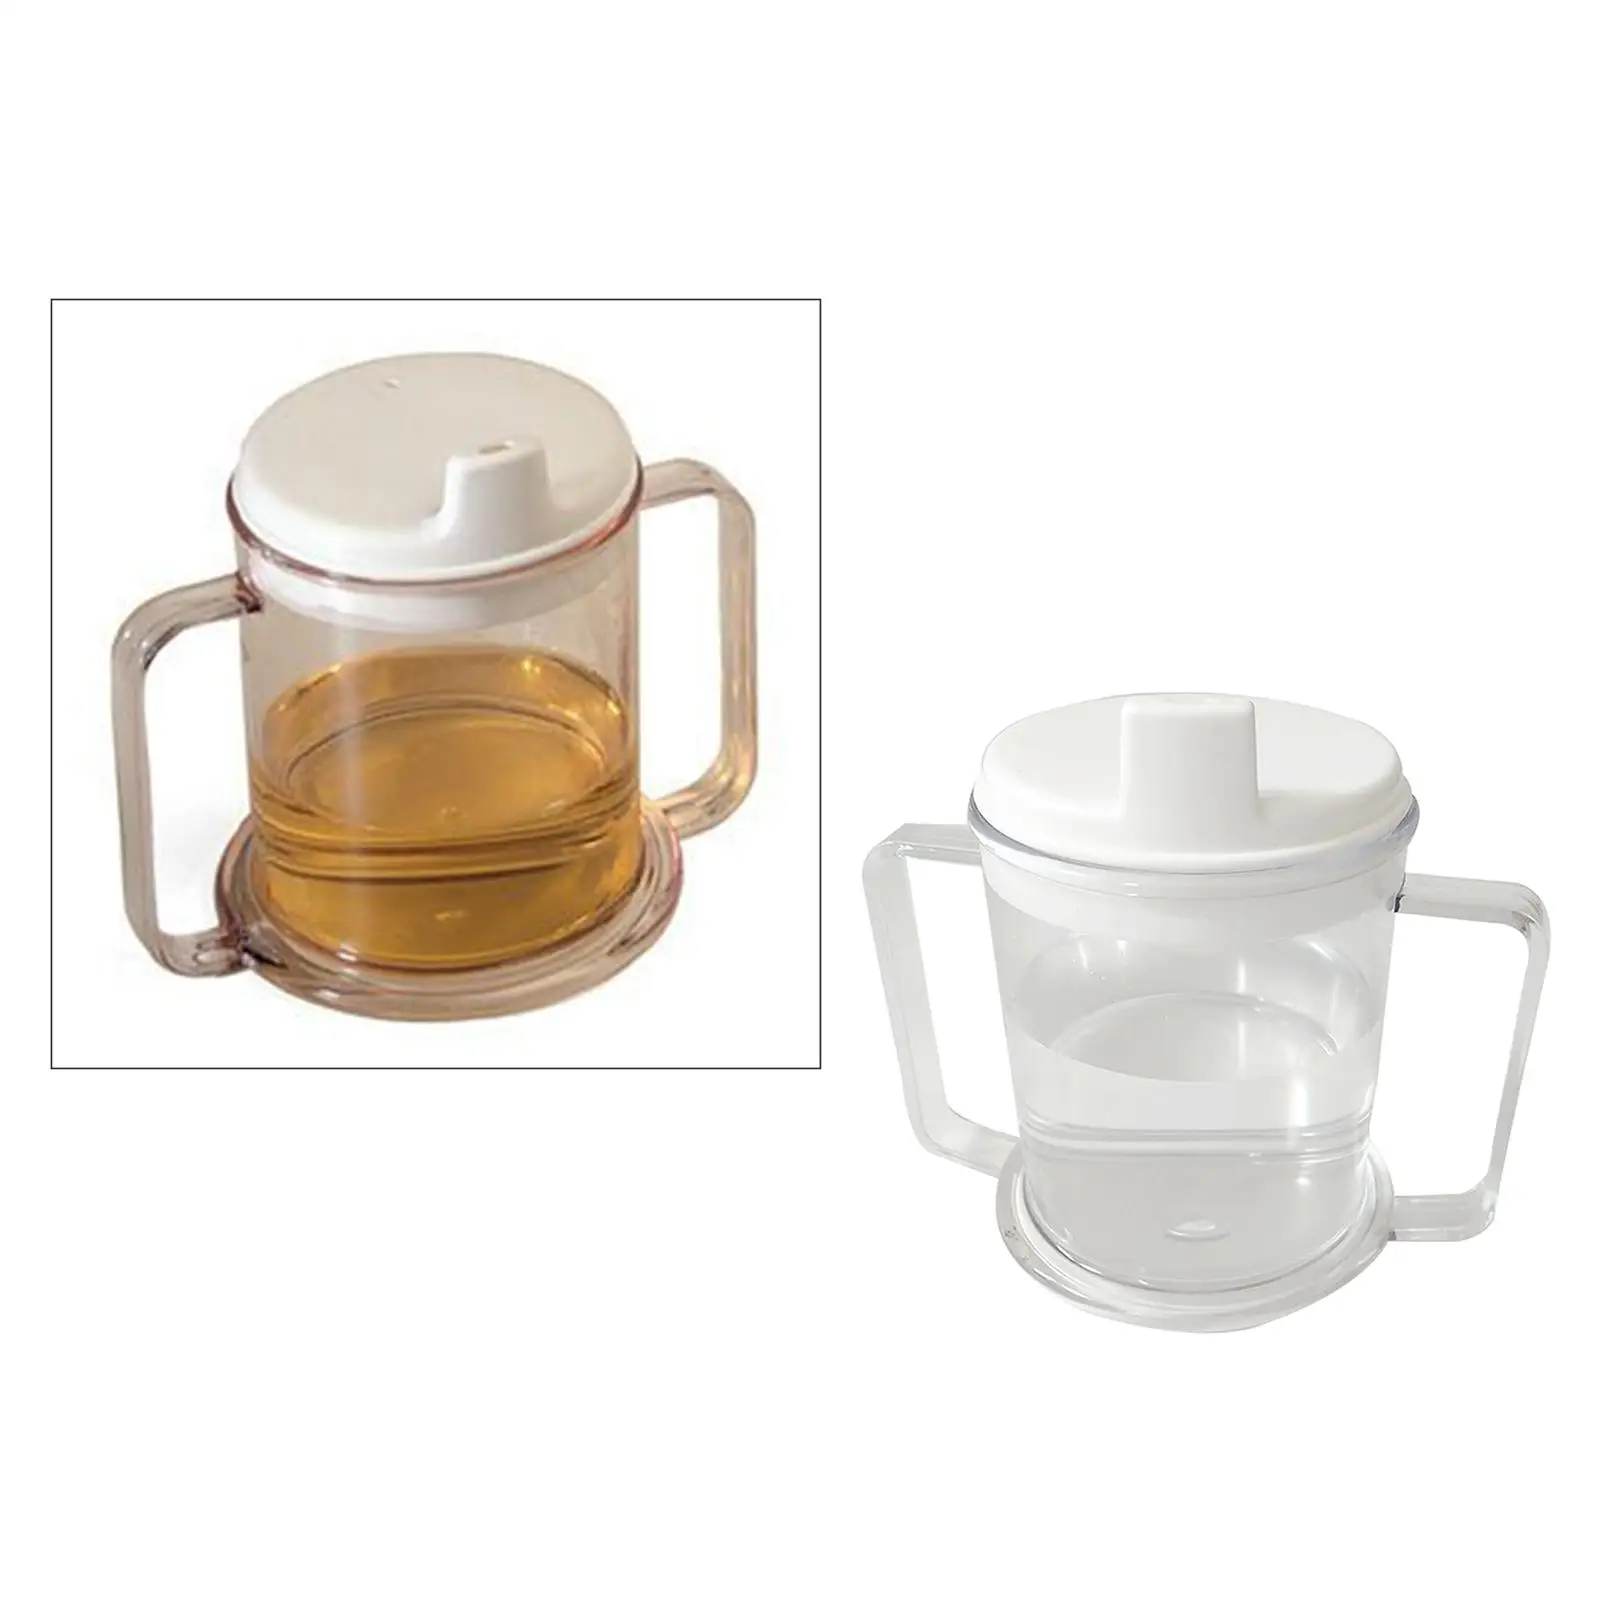 2 Handle Plastic Clear Mug Lightweight Drinking Cup Handles Sippy Cup